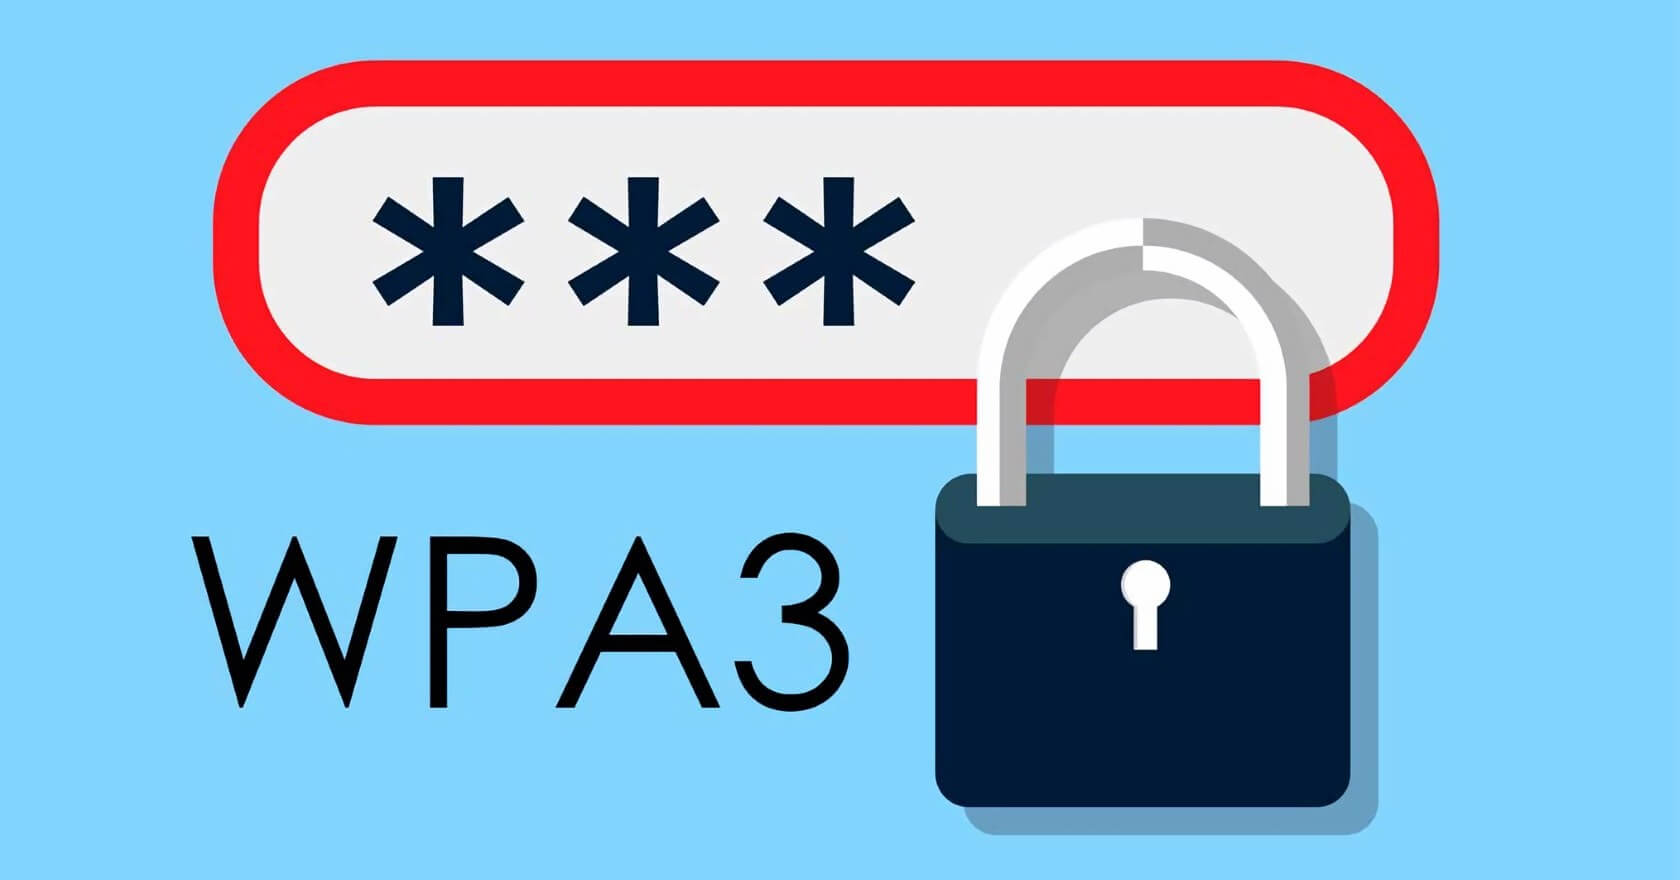 Security researchers disclose WPA3 security flaws that allow attackers to swipe sensitive data